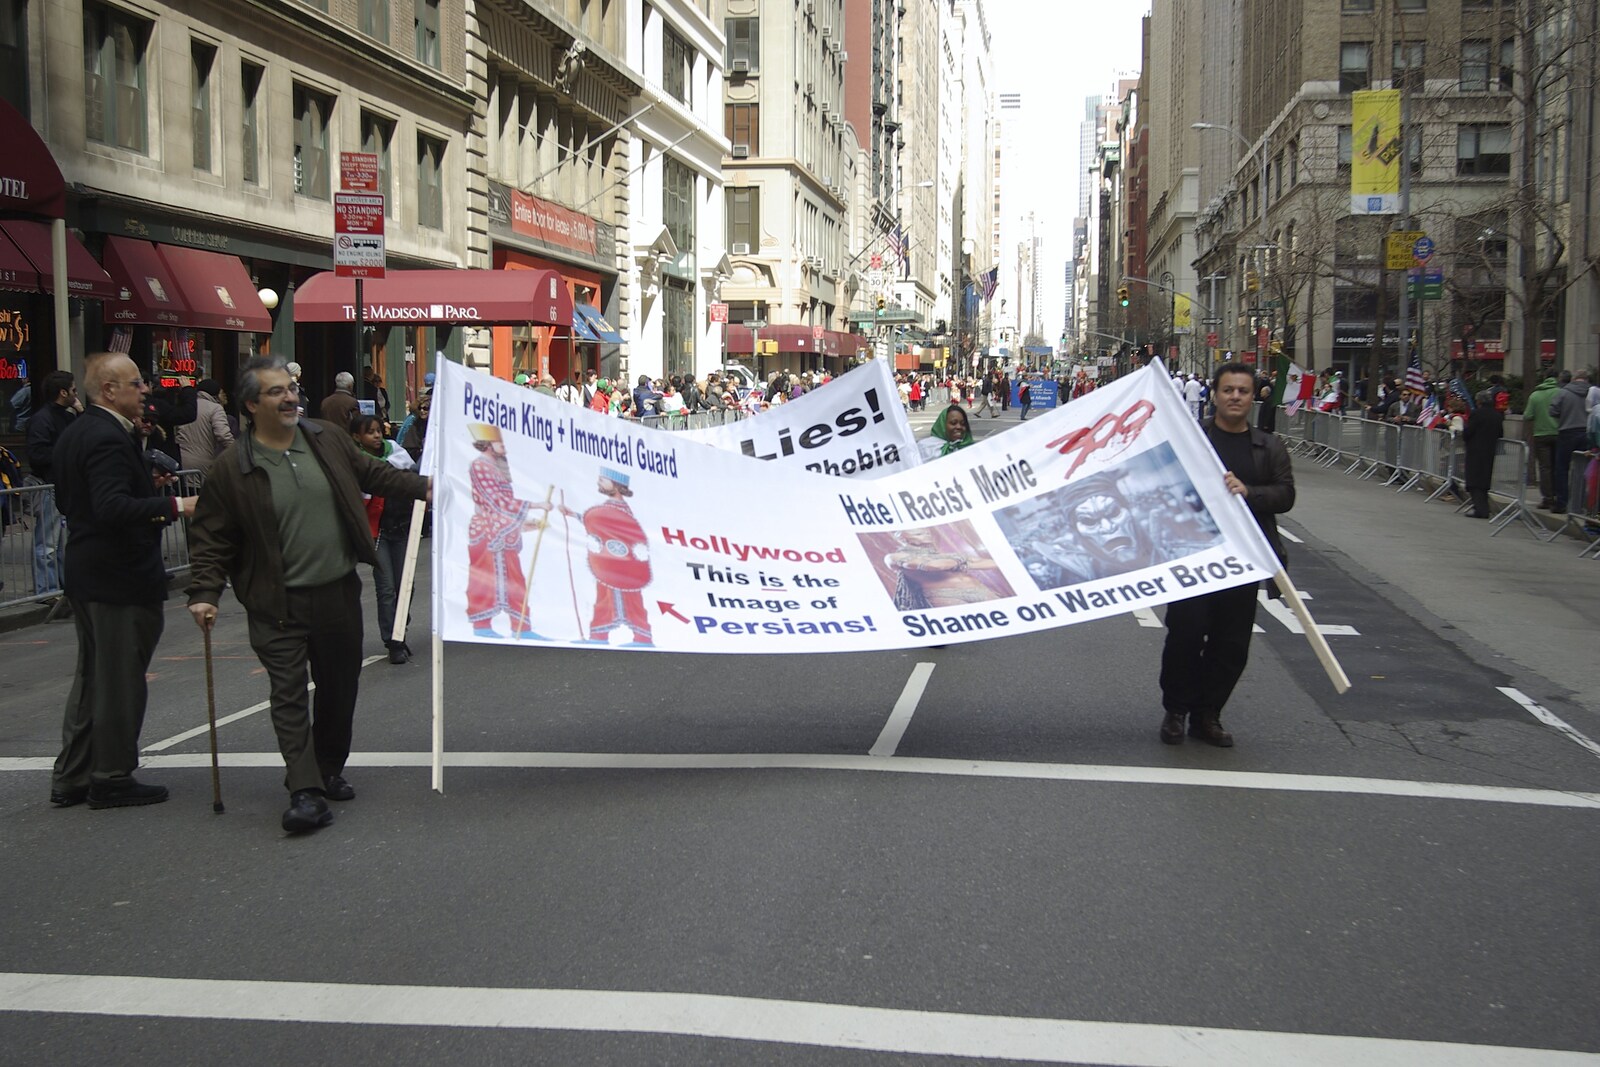 Persian Day Parade, Upper East Side and Midtown, New York, US - 25th March 2007: Some anti-Hollywood protest